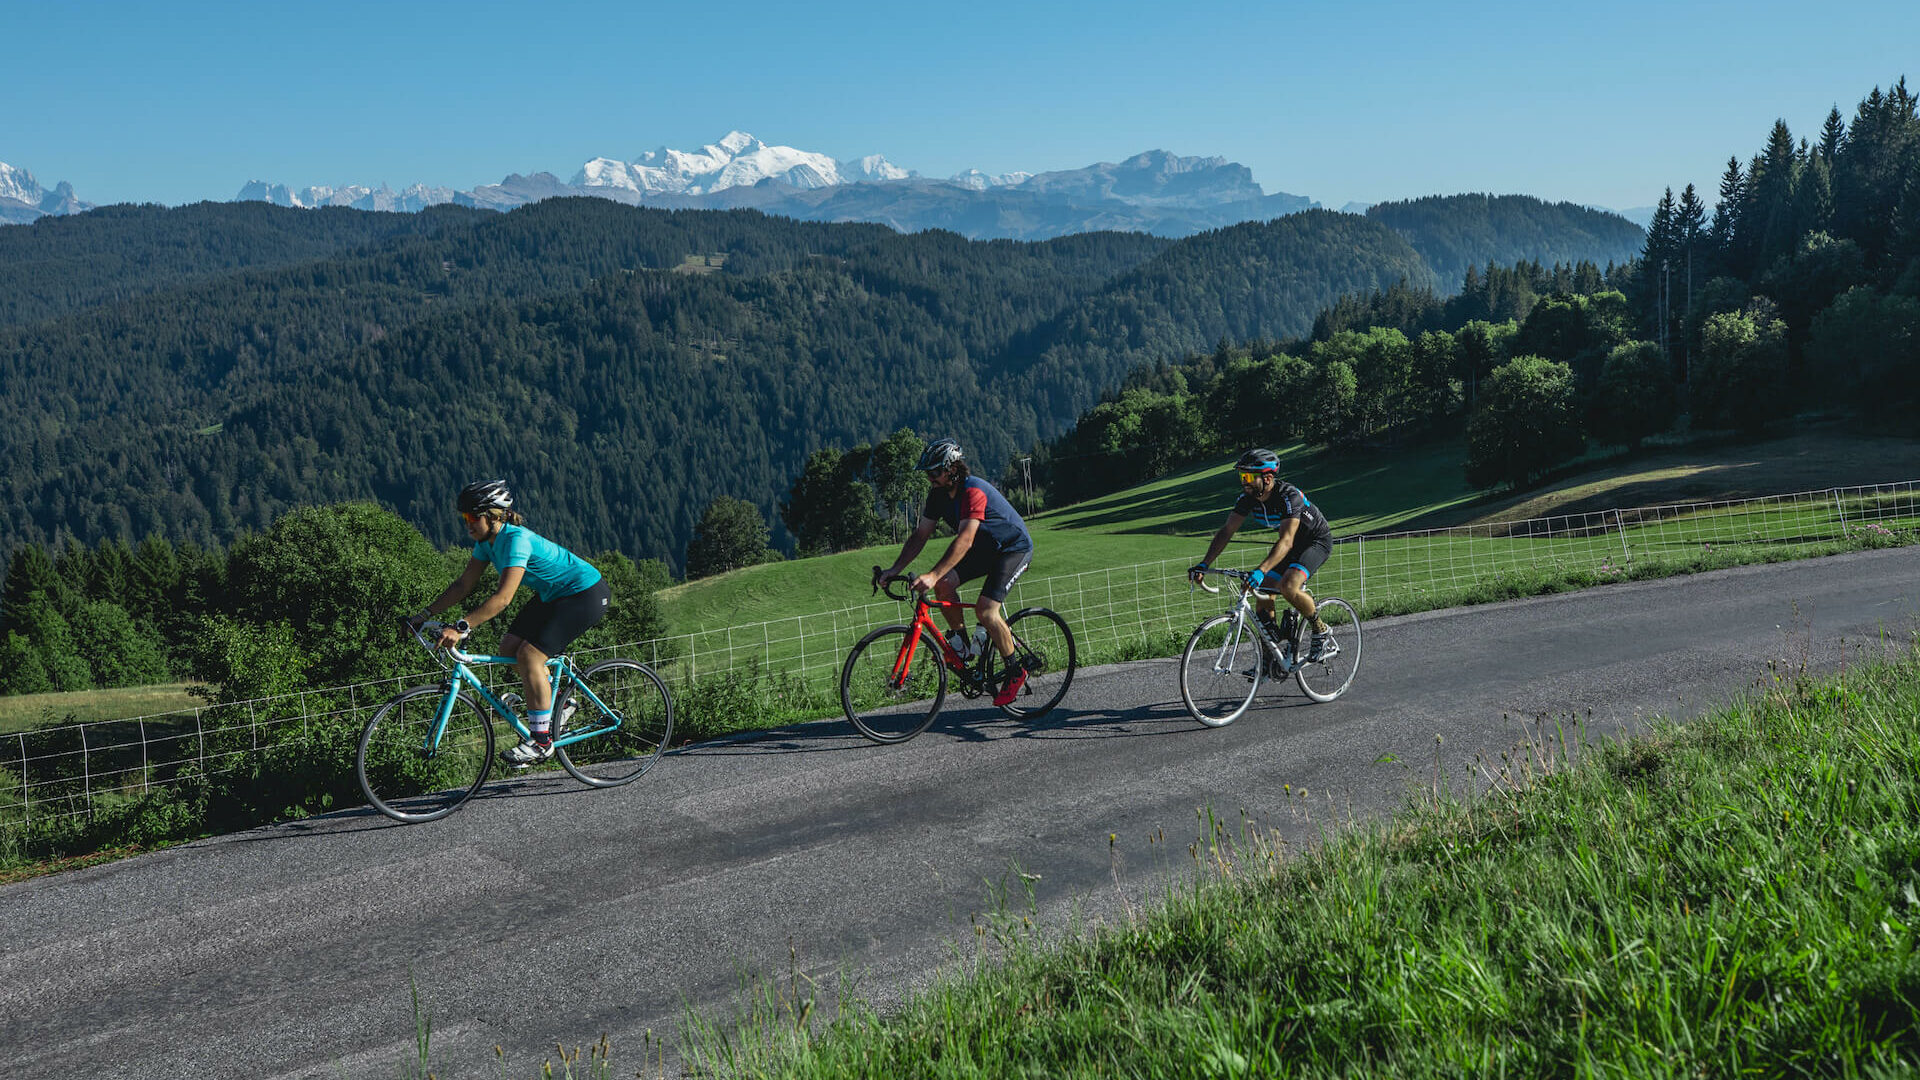 Cyclists on a mountain road in summer